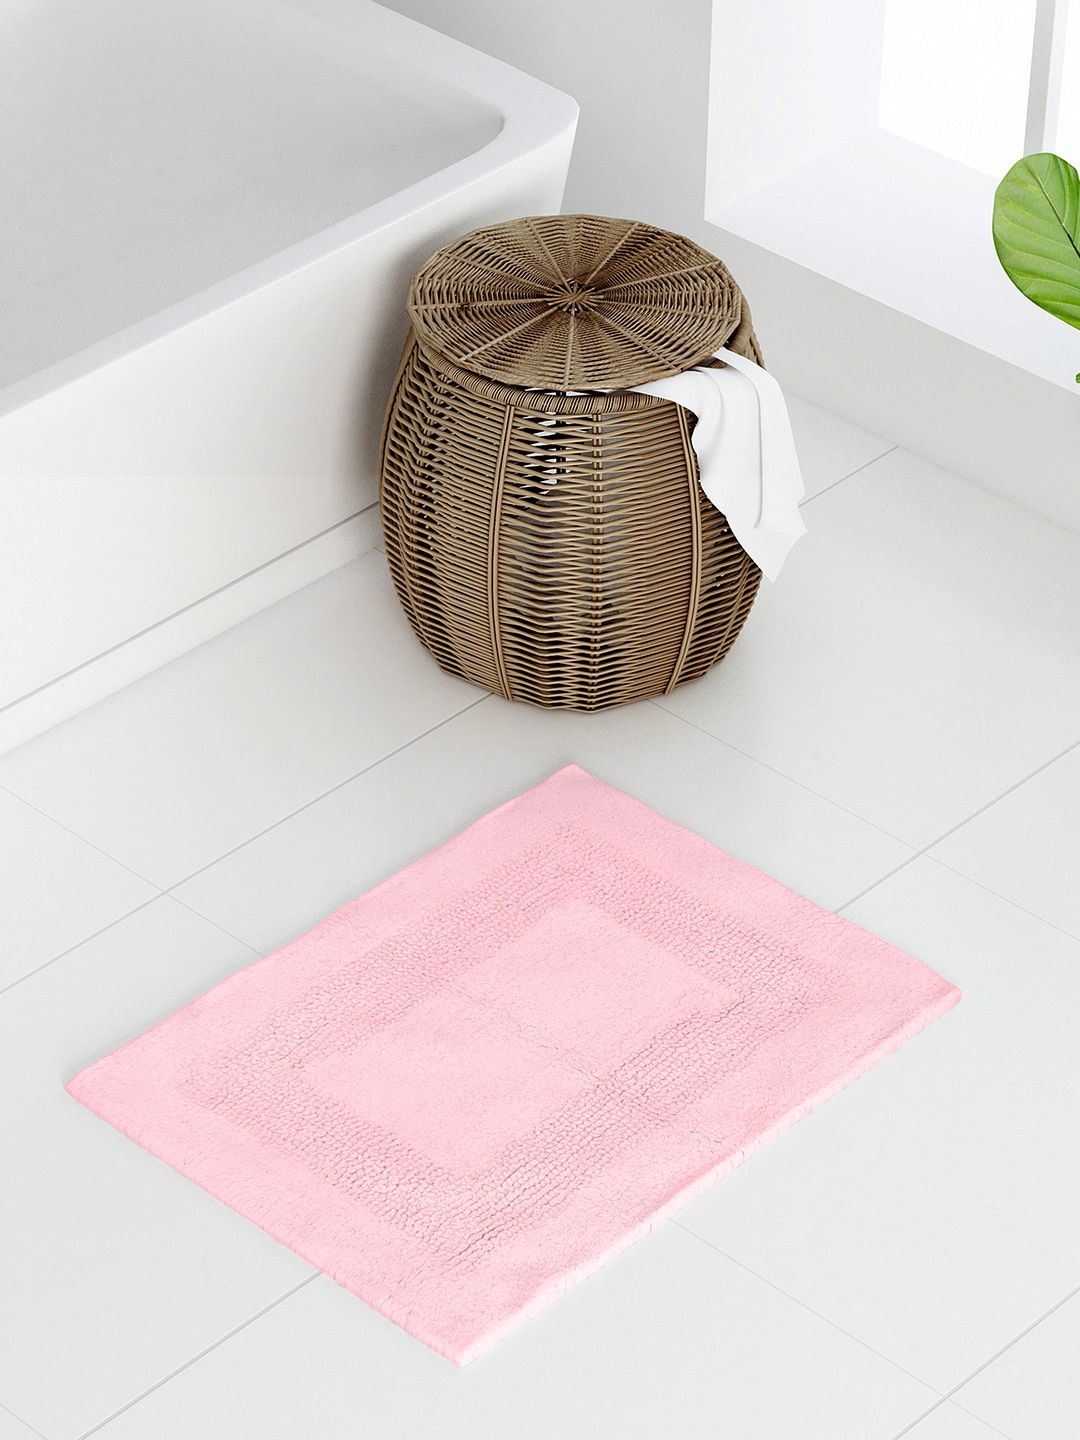 Raymond Home Pink Solid Cotton Bath Mat Price in India